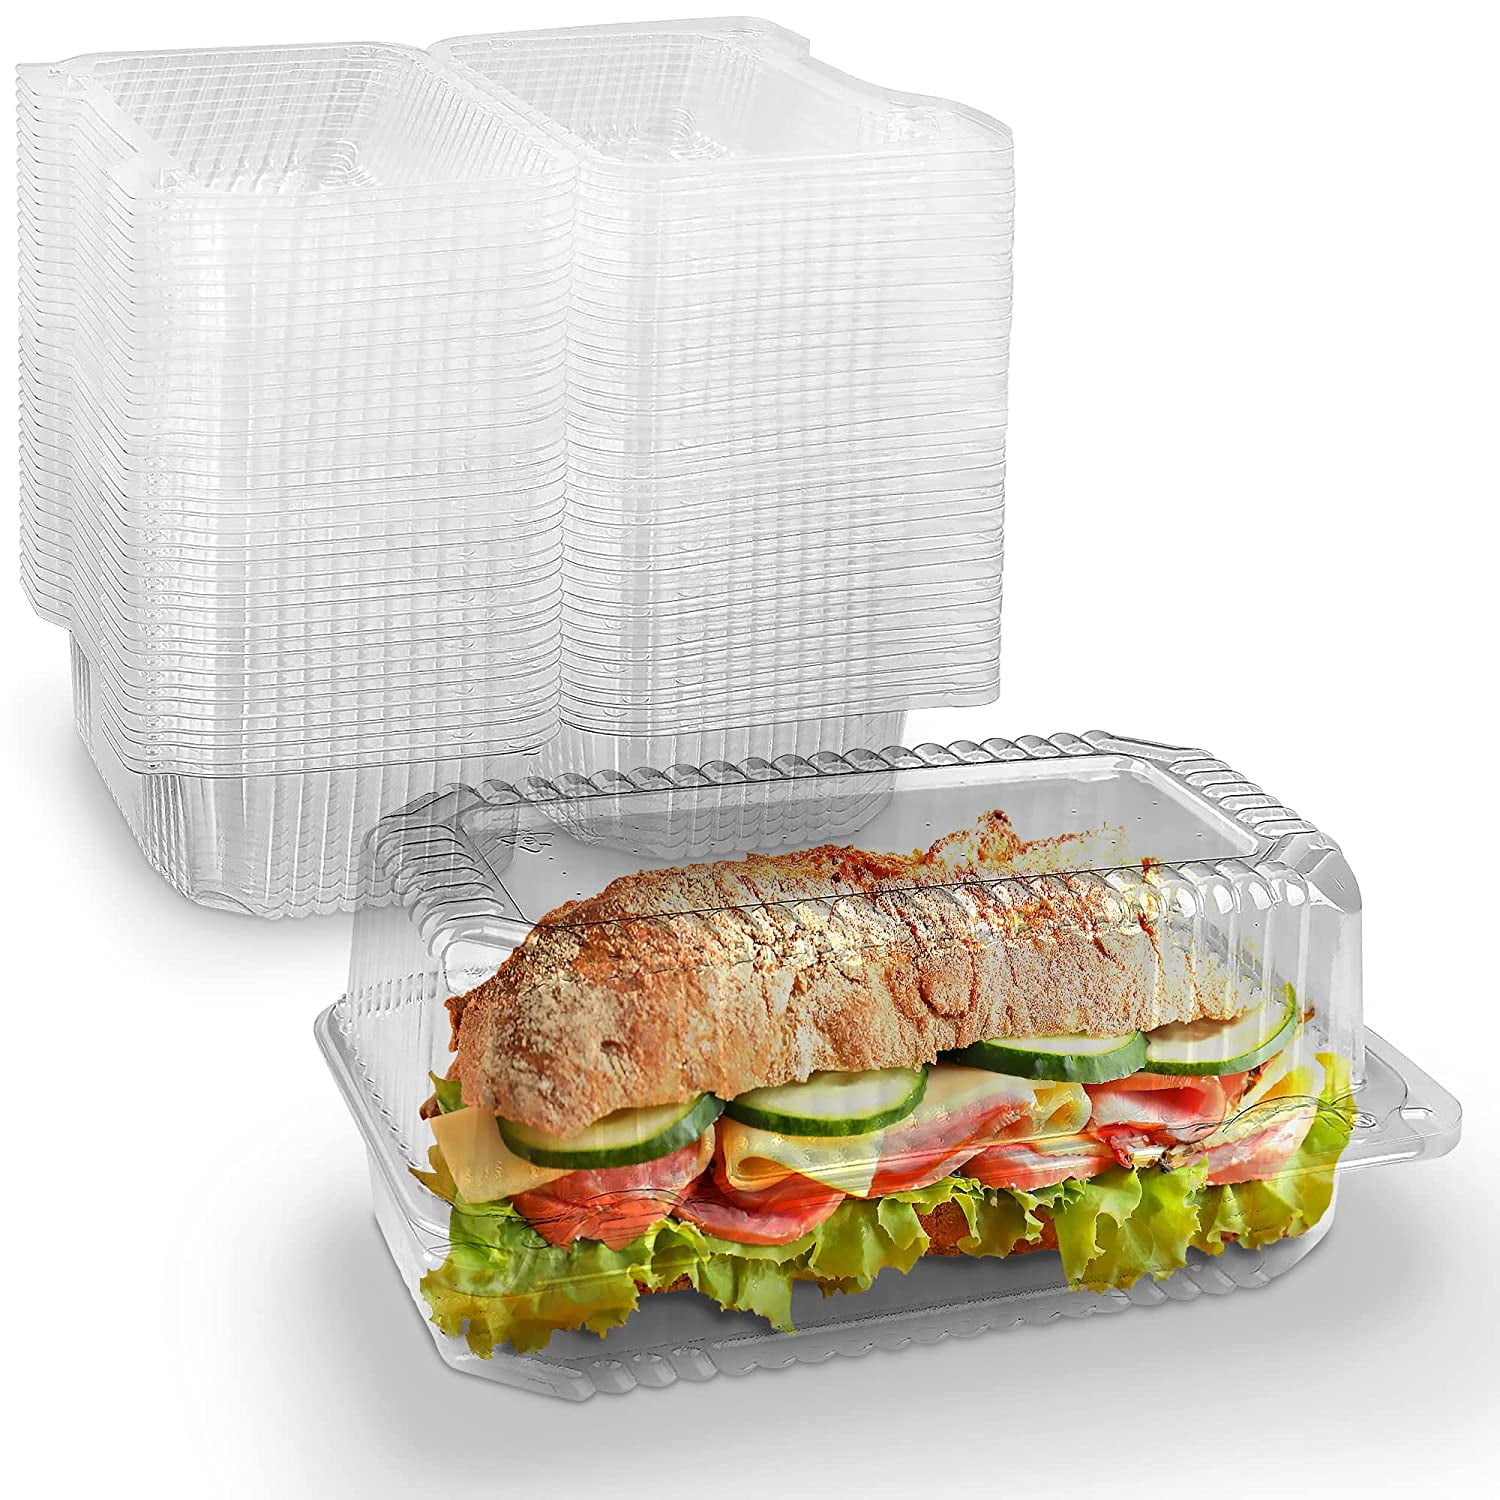 Avant Grub Biodegradable 6x6 Take Out Food Containers with Clamshell Hinged  Lid 50 Pack. Leak Proof, Disposable Take Out Box with Carry Meals To Go.